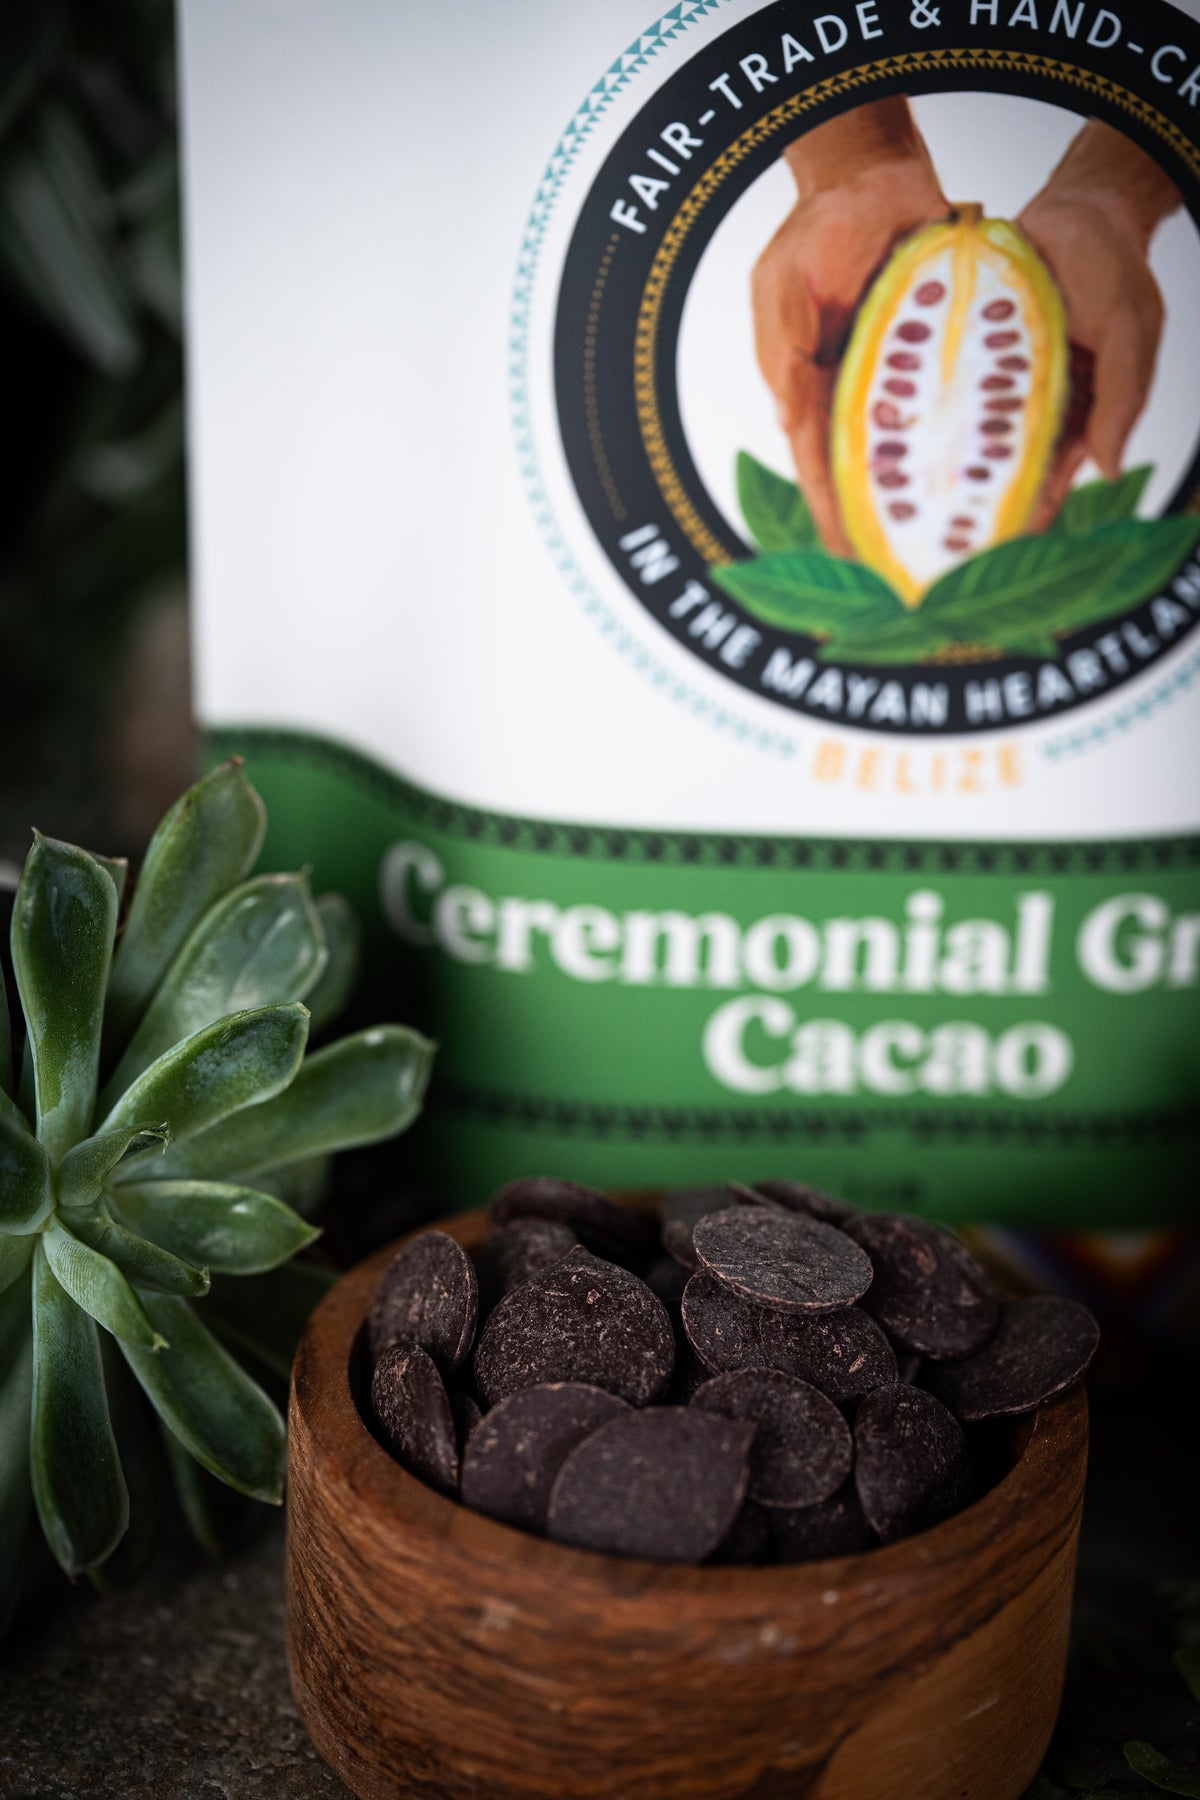 Heirloom Ceremonial Grade Cacao From Southern Belize